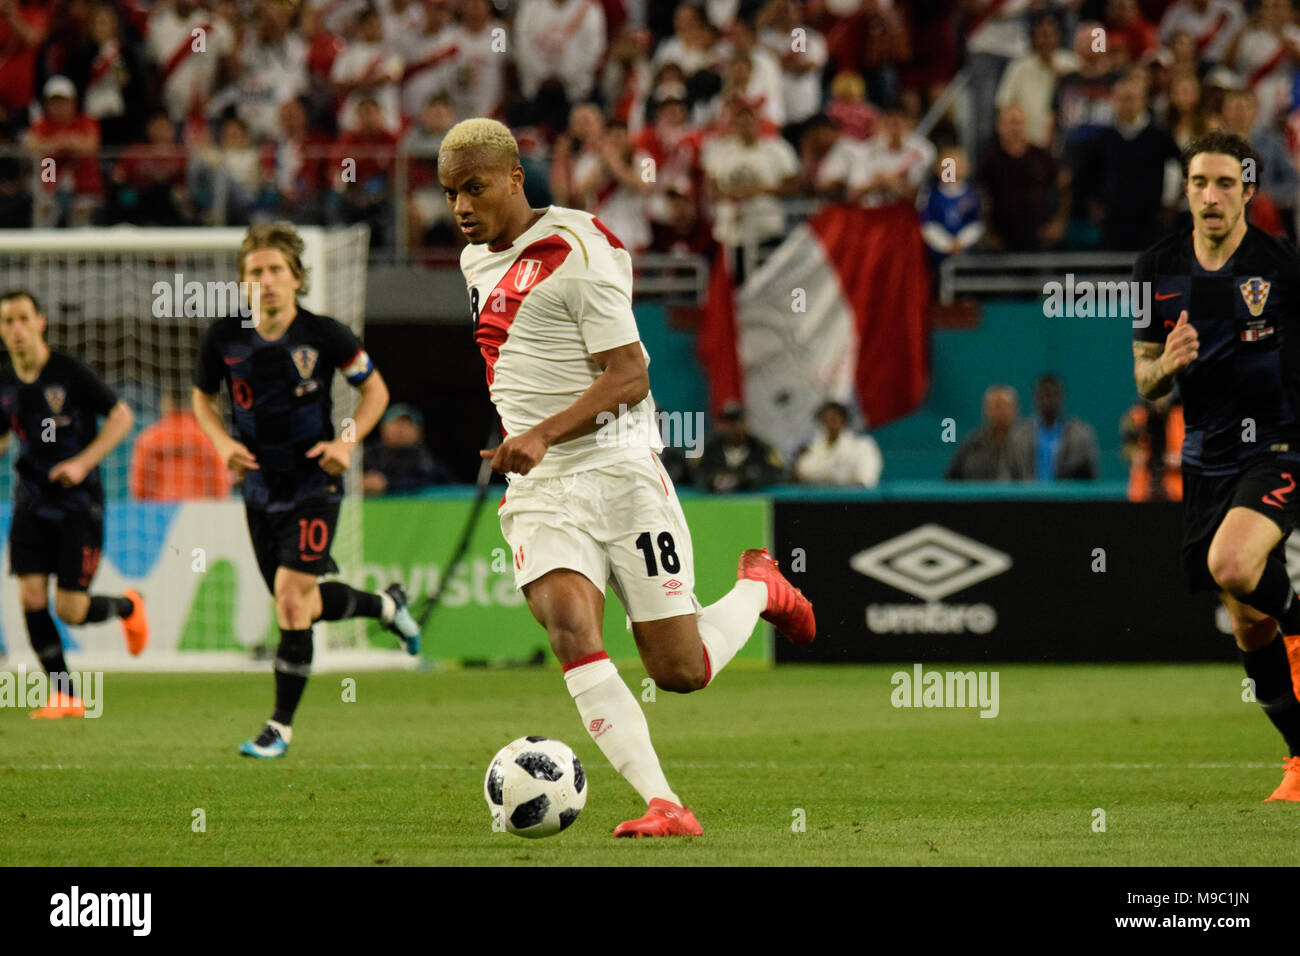 Miami, Florida, USA. 23rd Mar, 2018. André Carrillo, author of the first goal for the team of Peru against Croatia in the friendly game played in the city of Miami.The Croatian national football team played a friendly match against Peru on 23rd March 2018. Credit: Fernando Oduber/SOPA Images/ZUMA Wire/Alamy Live News Stock Photo